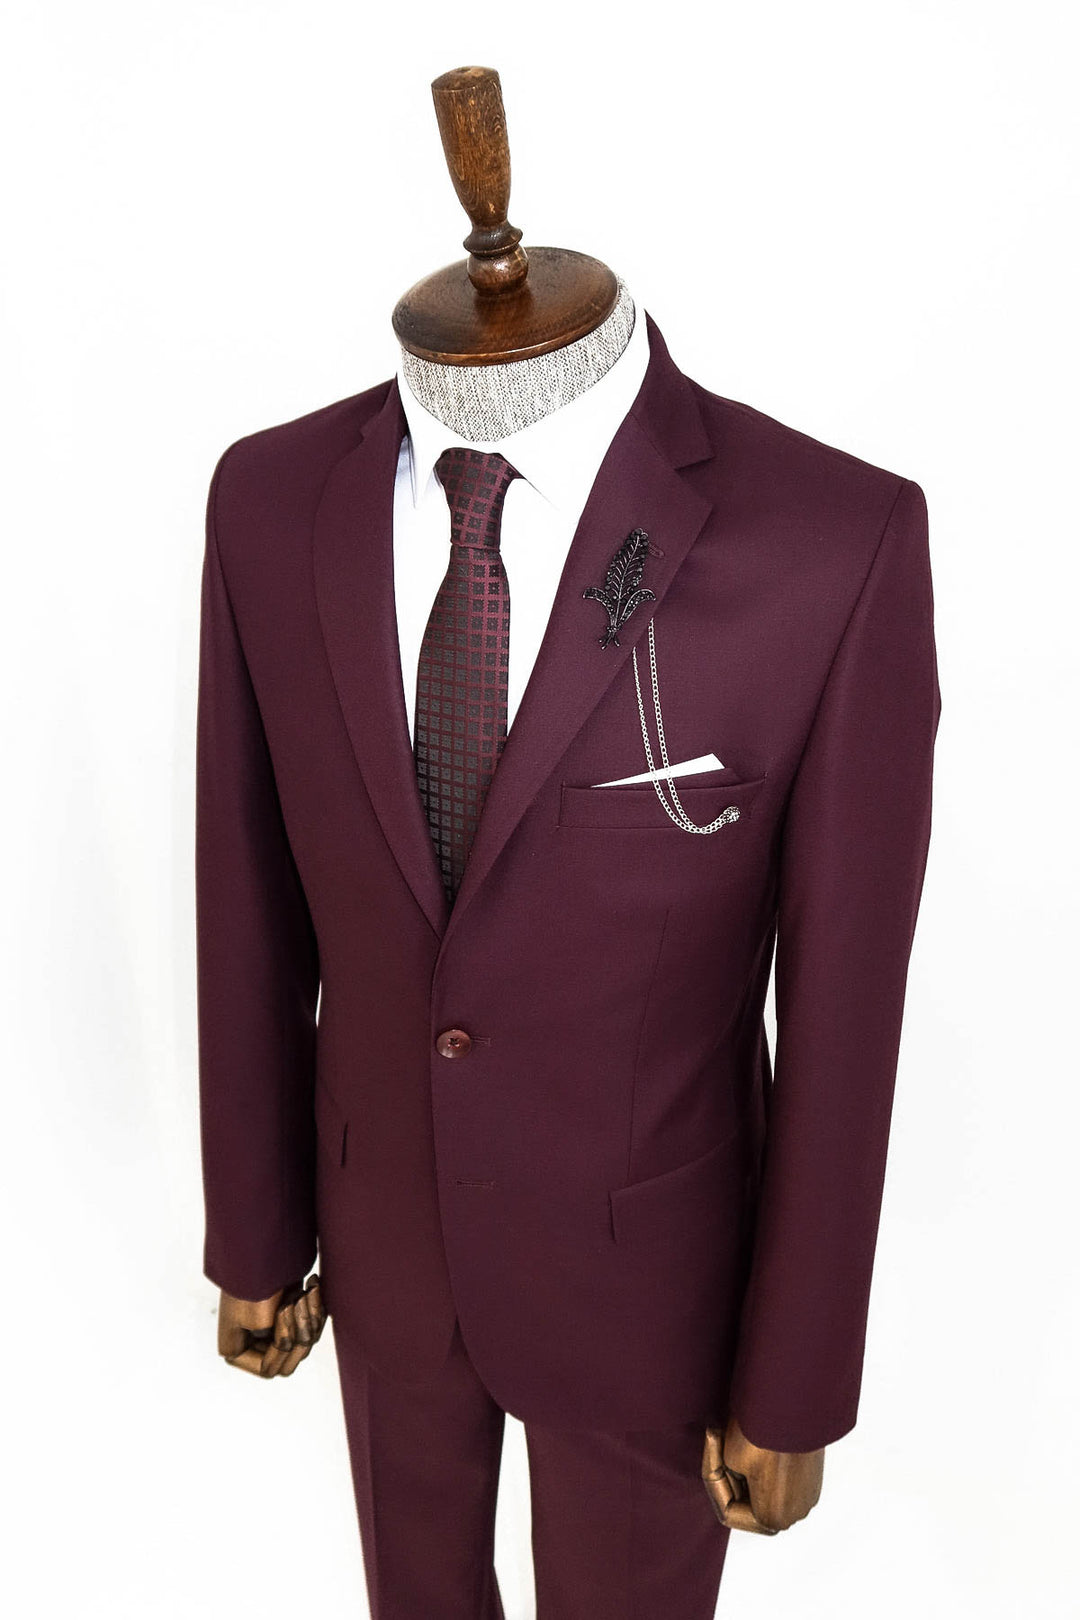 Two Buttons Two Piece Burgundy Men Suit - Wessi